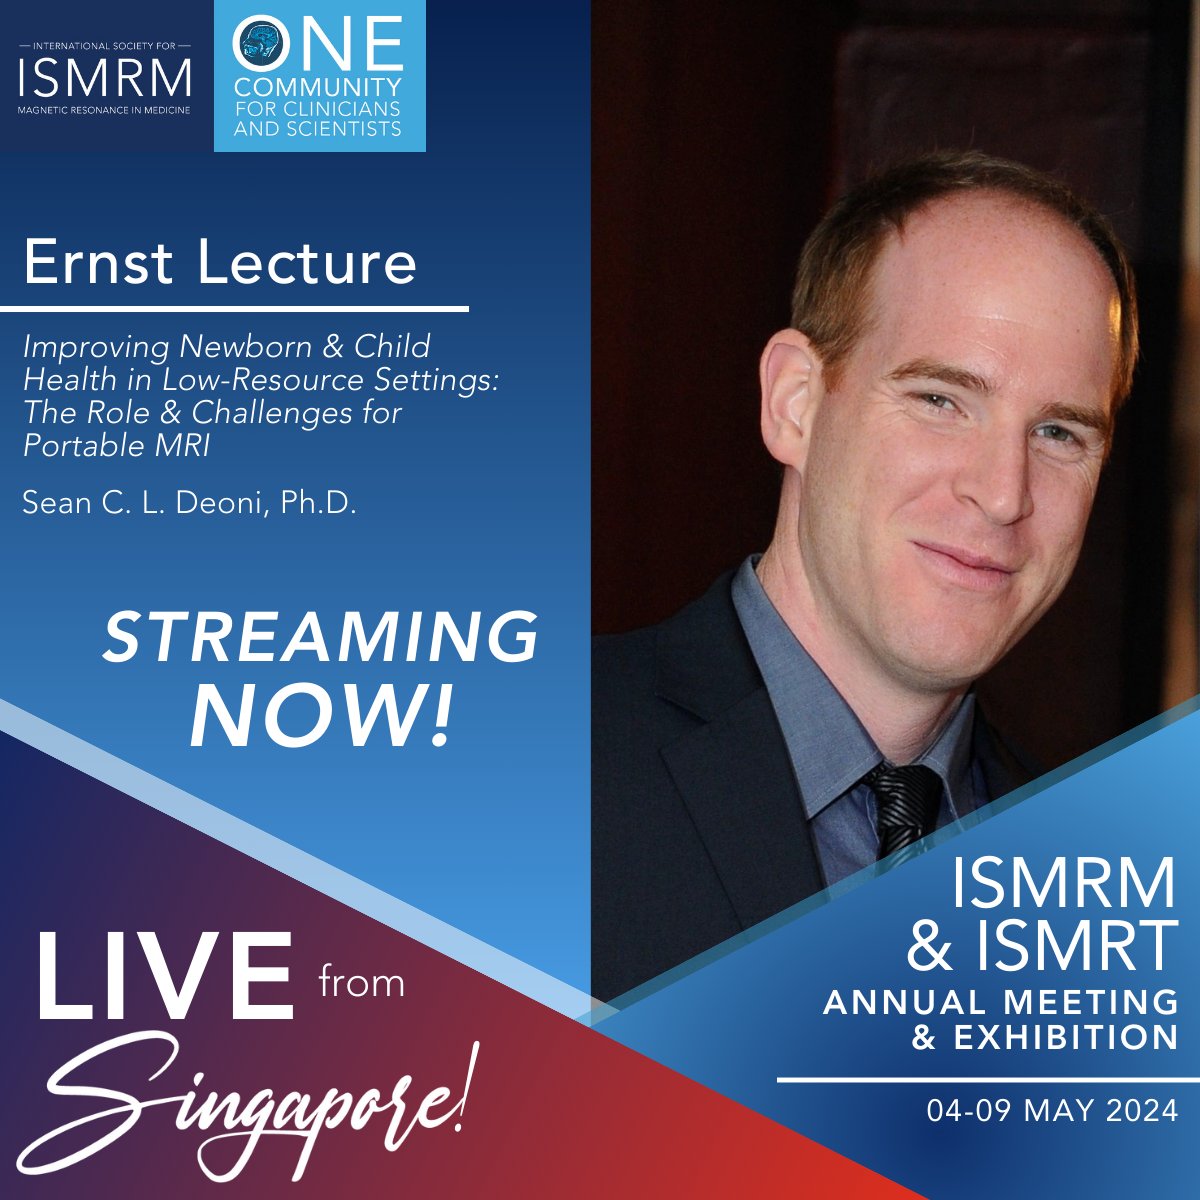 LIVE from Singapore! Watch the Ernst Lecture STREAMING NOW: ismrm2024.blazestreaming.com/sessions/ismrm… #ISMRM2024 #ISMRT2024 #ISMRM #ISMRT #MRI #MR#MagneticResonance #Singapore